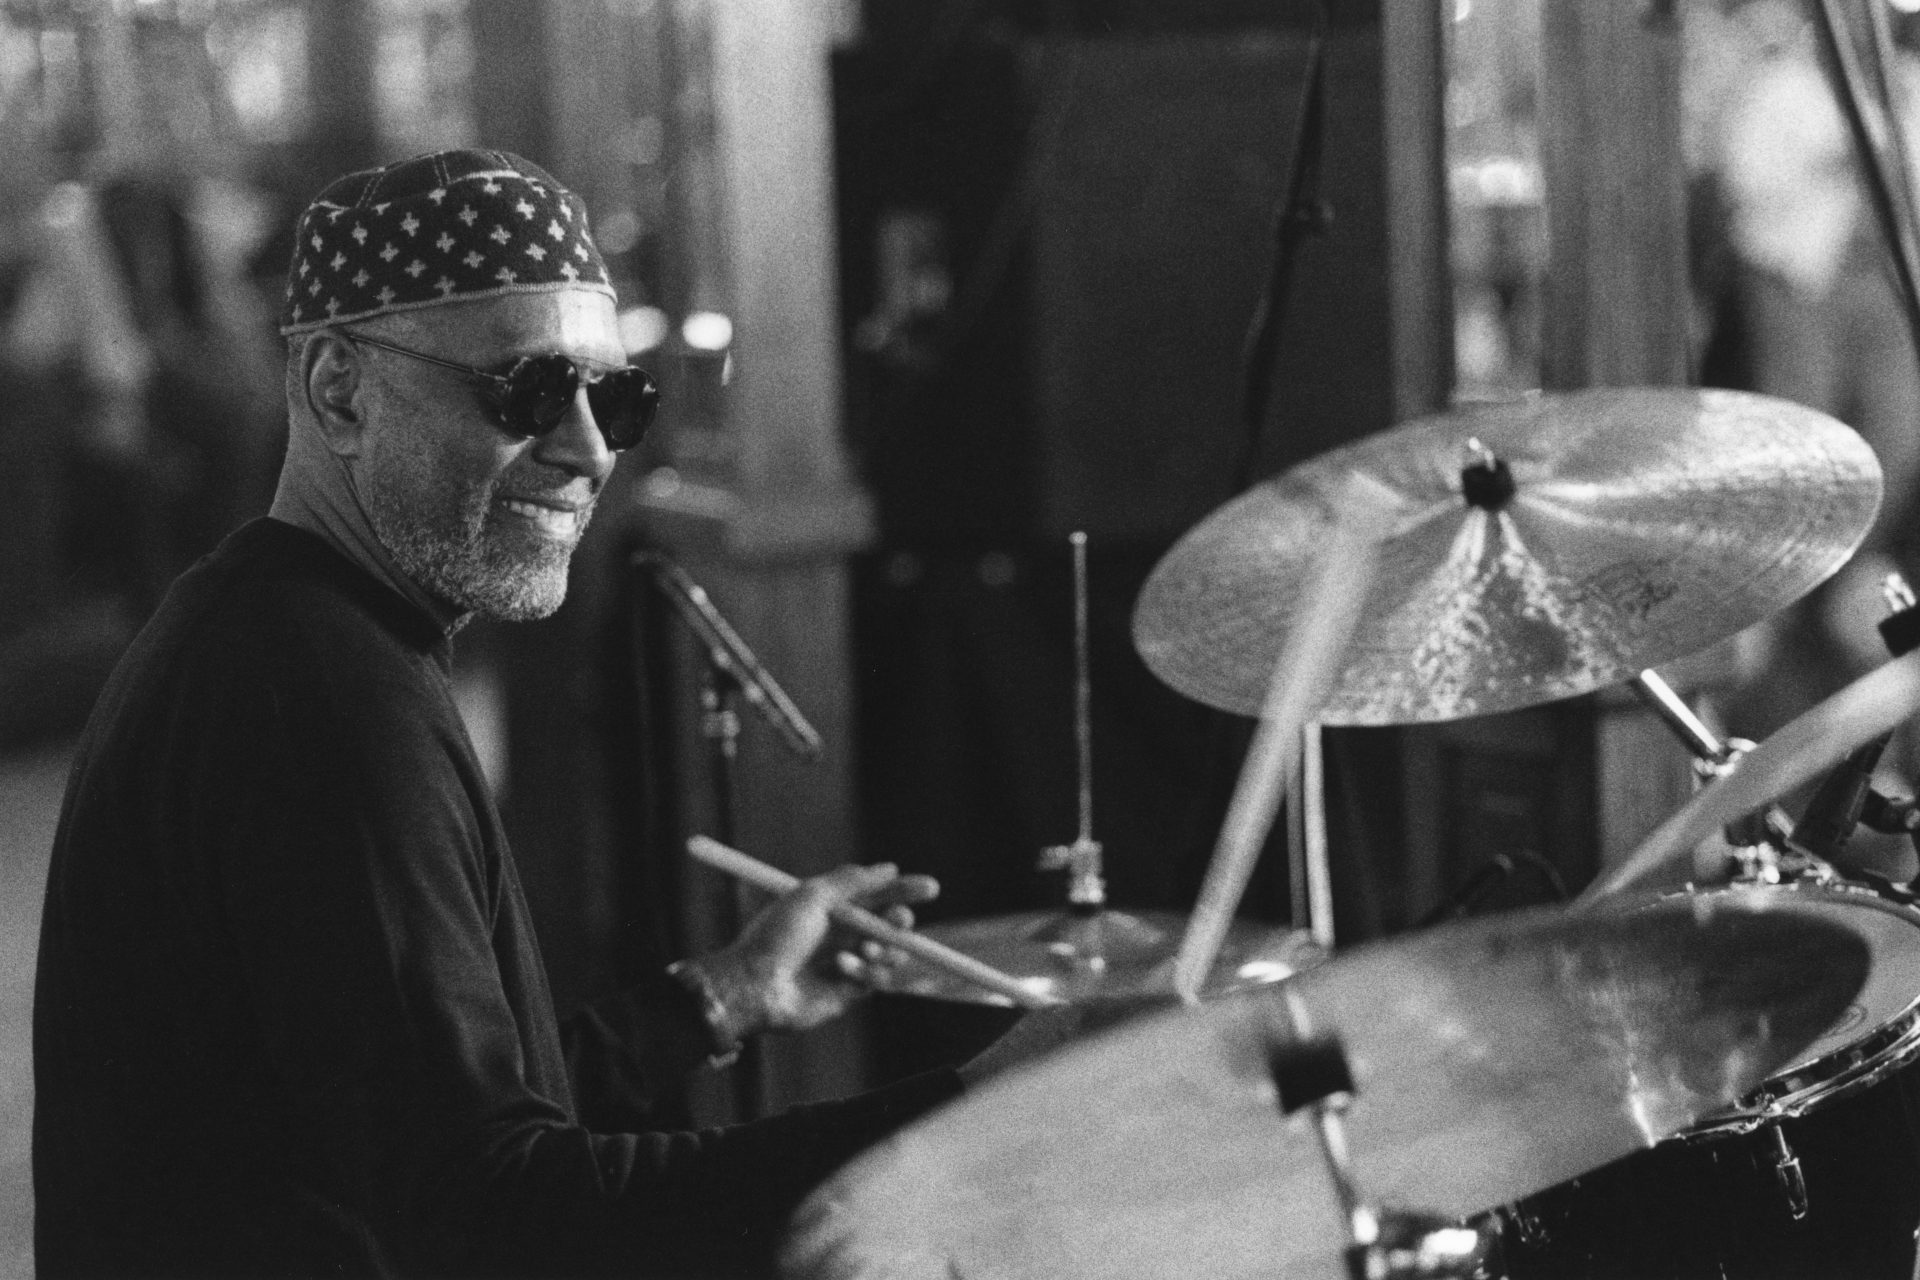 <p>We started with an American musician and we are ending with one. In early April, the American jazz drummer Albert Heath died away in his residence in Santa Fe, New Mexico. The cause of death was leukemia. Heath was 88 years old.</p> <p><a href="https://www.msn.com/en-us/channel/source/Showbizz%20Daily%20English/sr-vid-w8hcuhvu3f8qr5wn5rk8xhsu5x8irqrgtxcypg4uxvn7tq9vkkfa?cvid=cddbc5c4fc9748a196a59c4cb5f3d12a&ei=7" rel="noopener">Follow Showbizz Daily to see the best photo galleries every day</a></p>